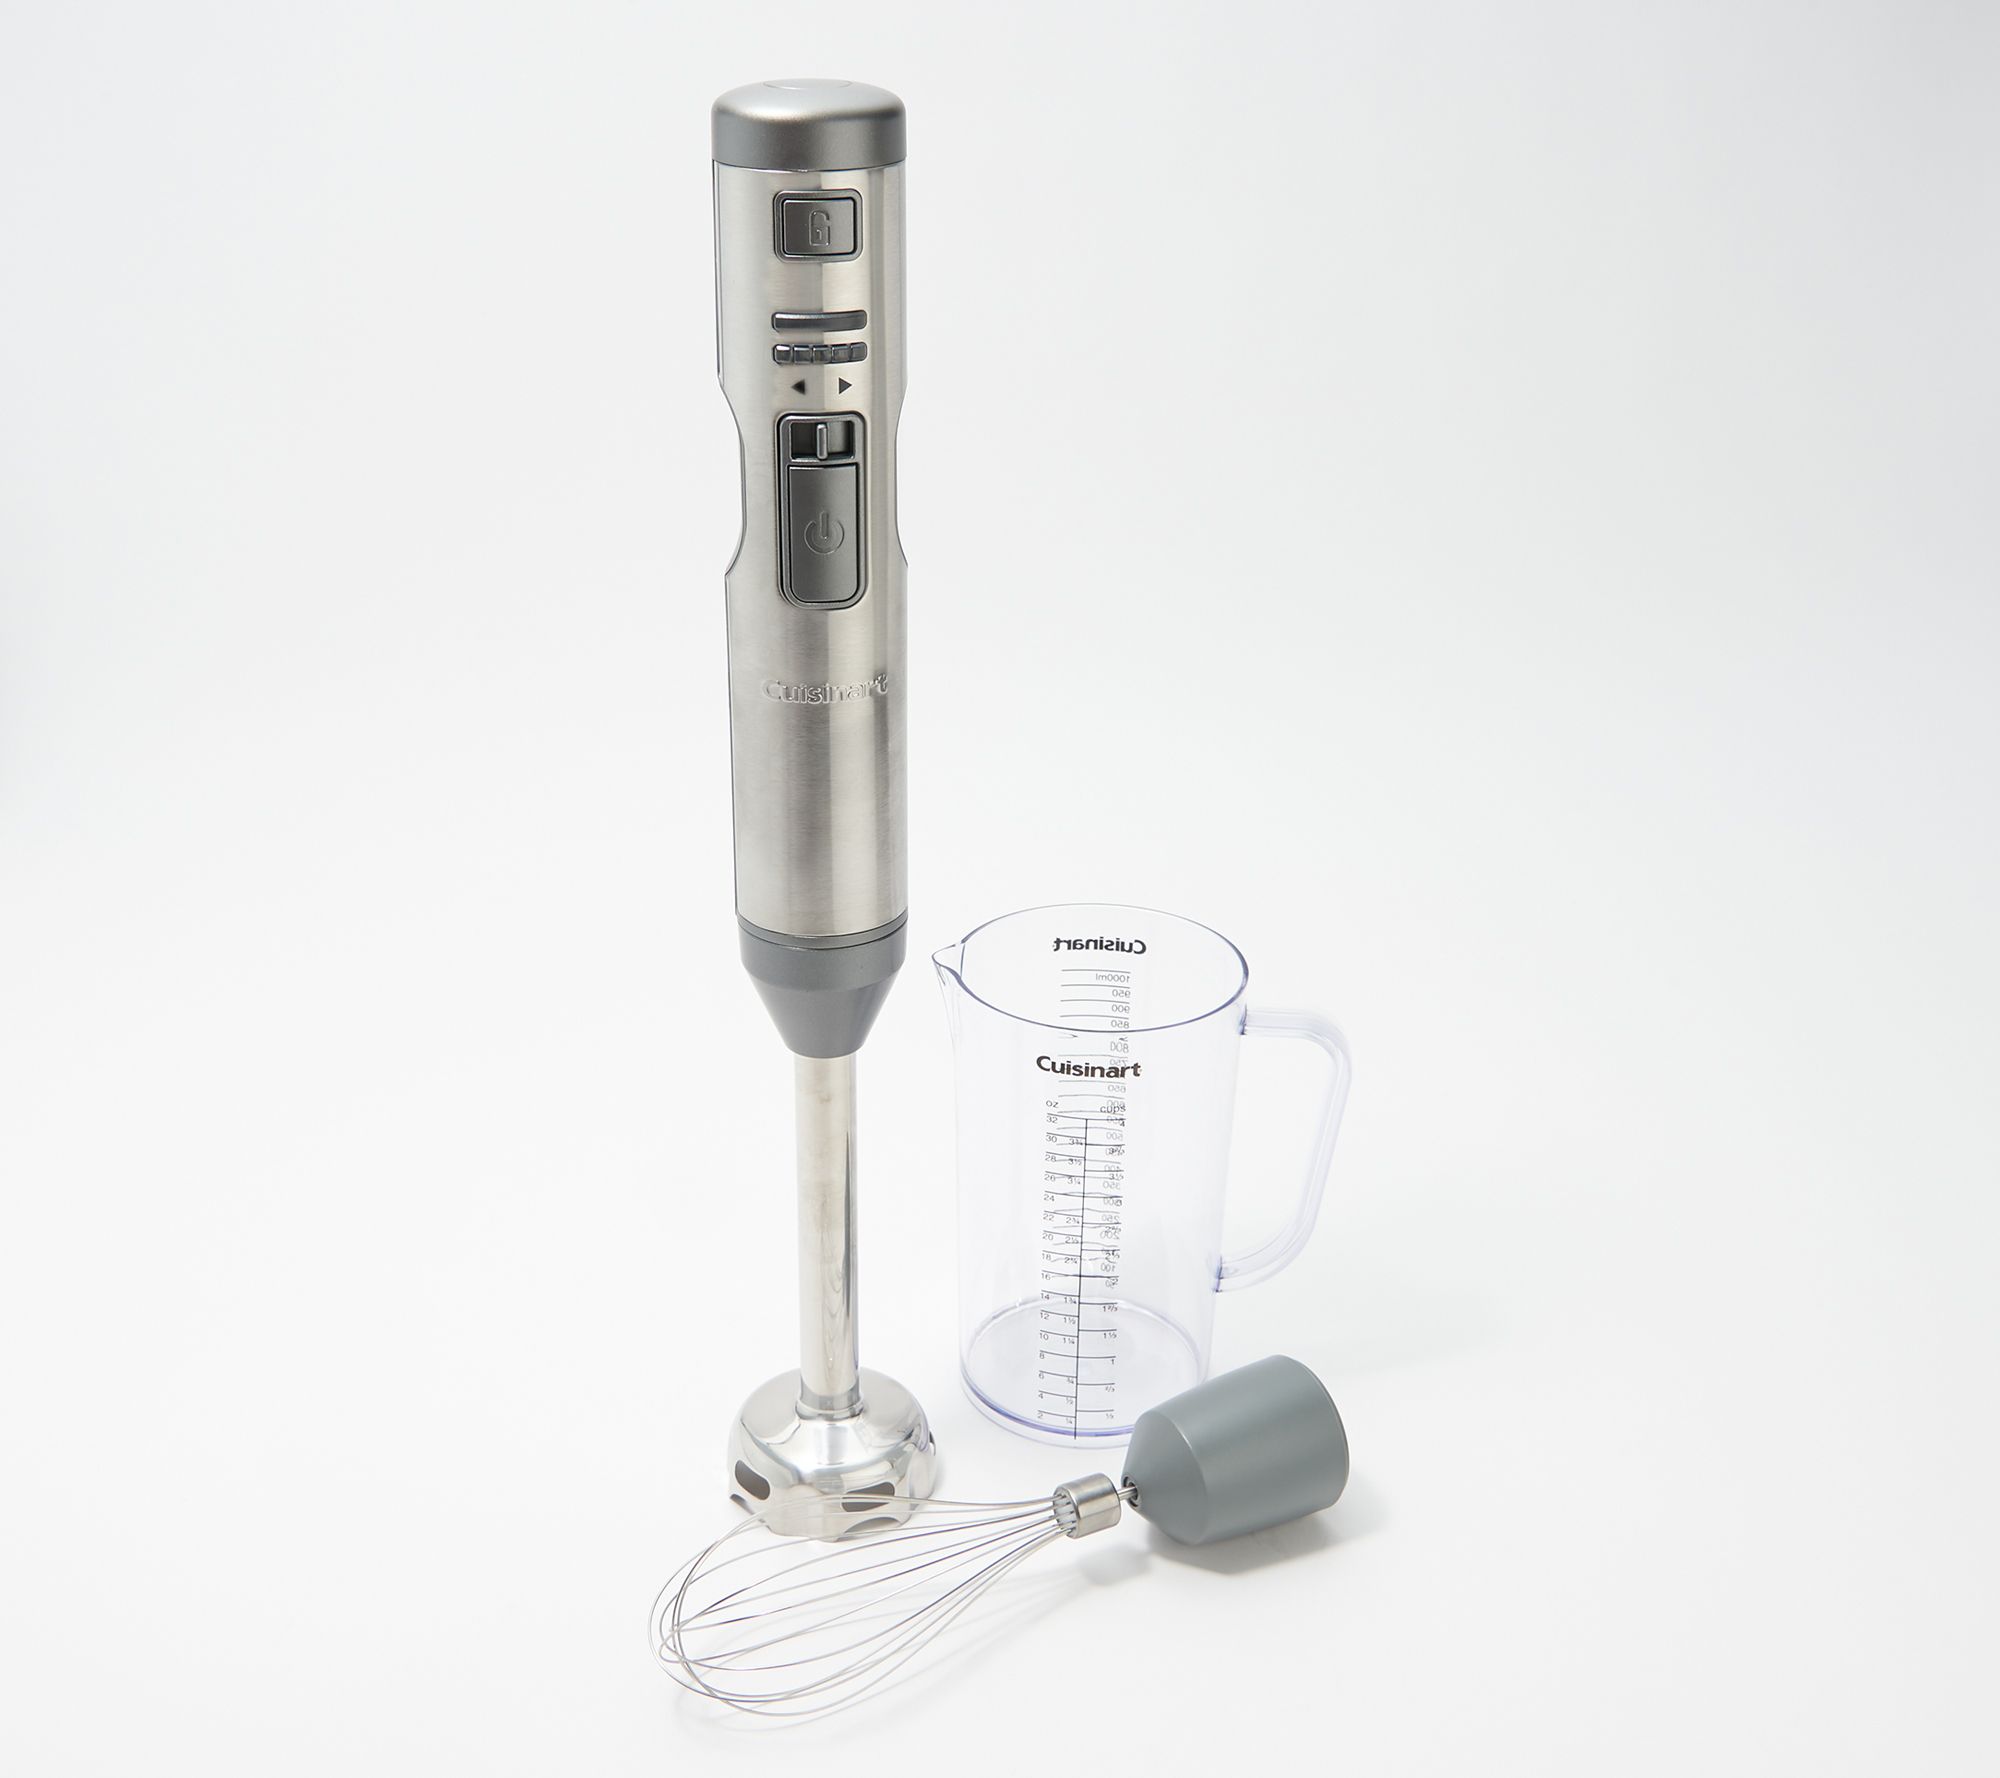 Grab this top-rated Cuisinart cordless immersion blender that